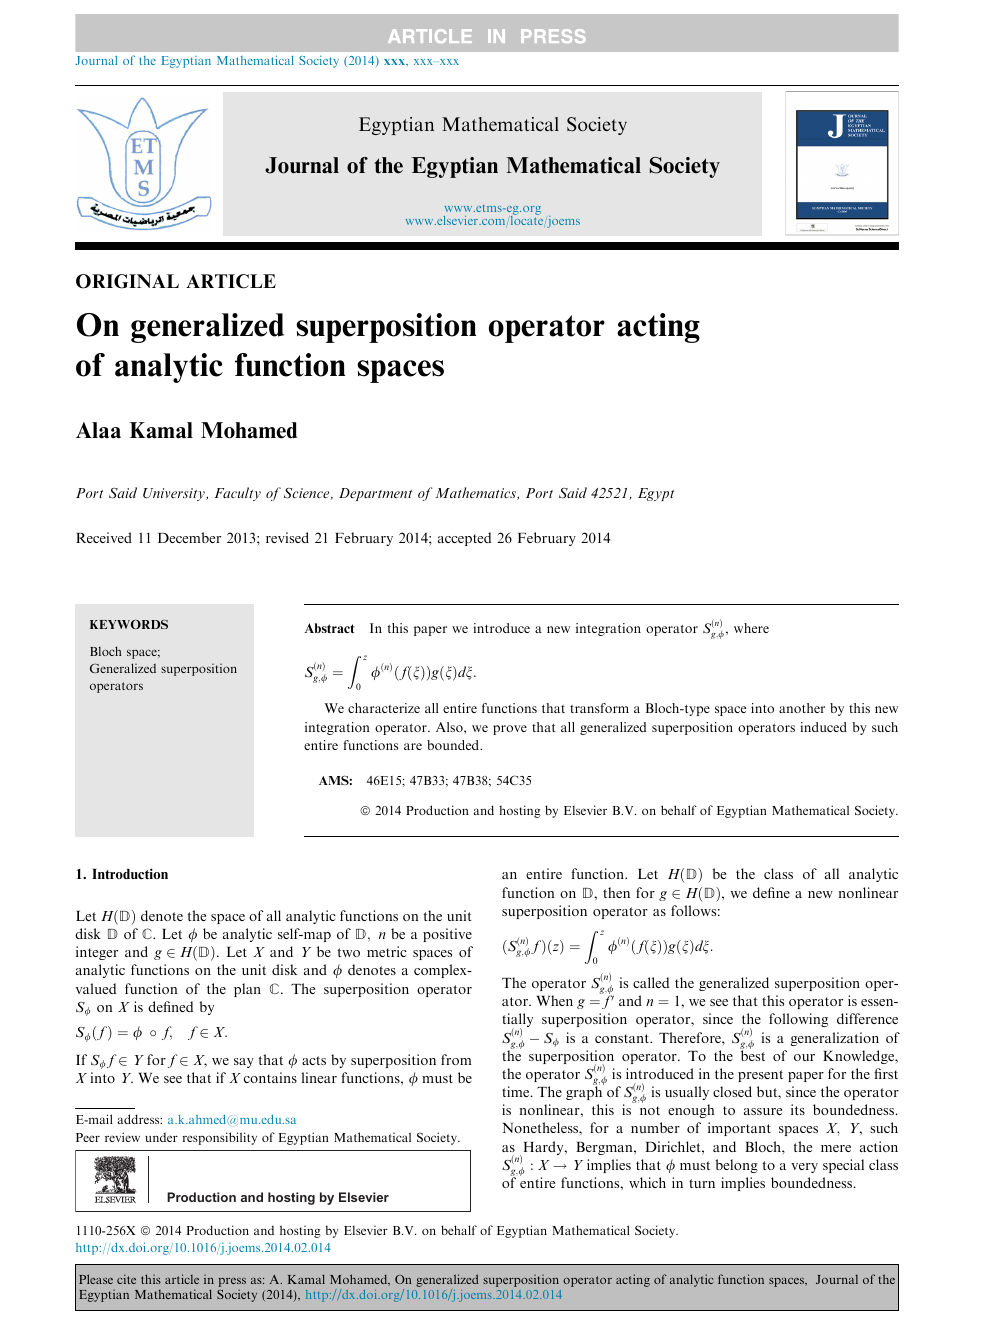 On Generalized Superposition Operator Acting Of Analytic Function Spaces Topic Of Research Paper In Mathematics Download Scholarly Article Pdf And Read For Free On Cyberleninka Open Science Hub